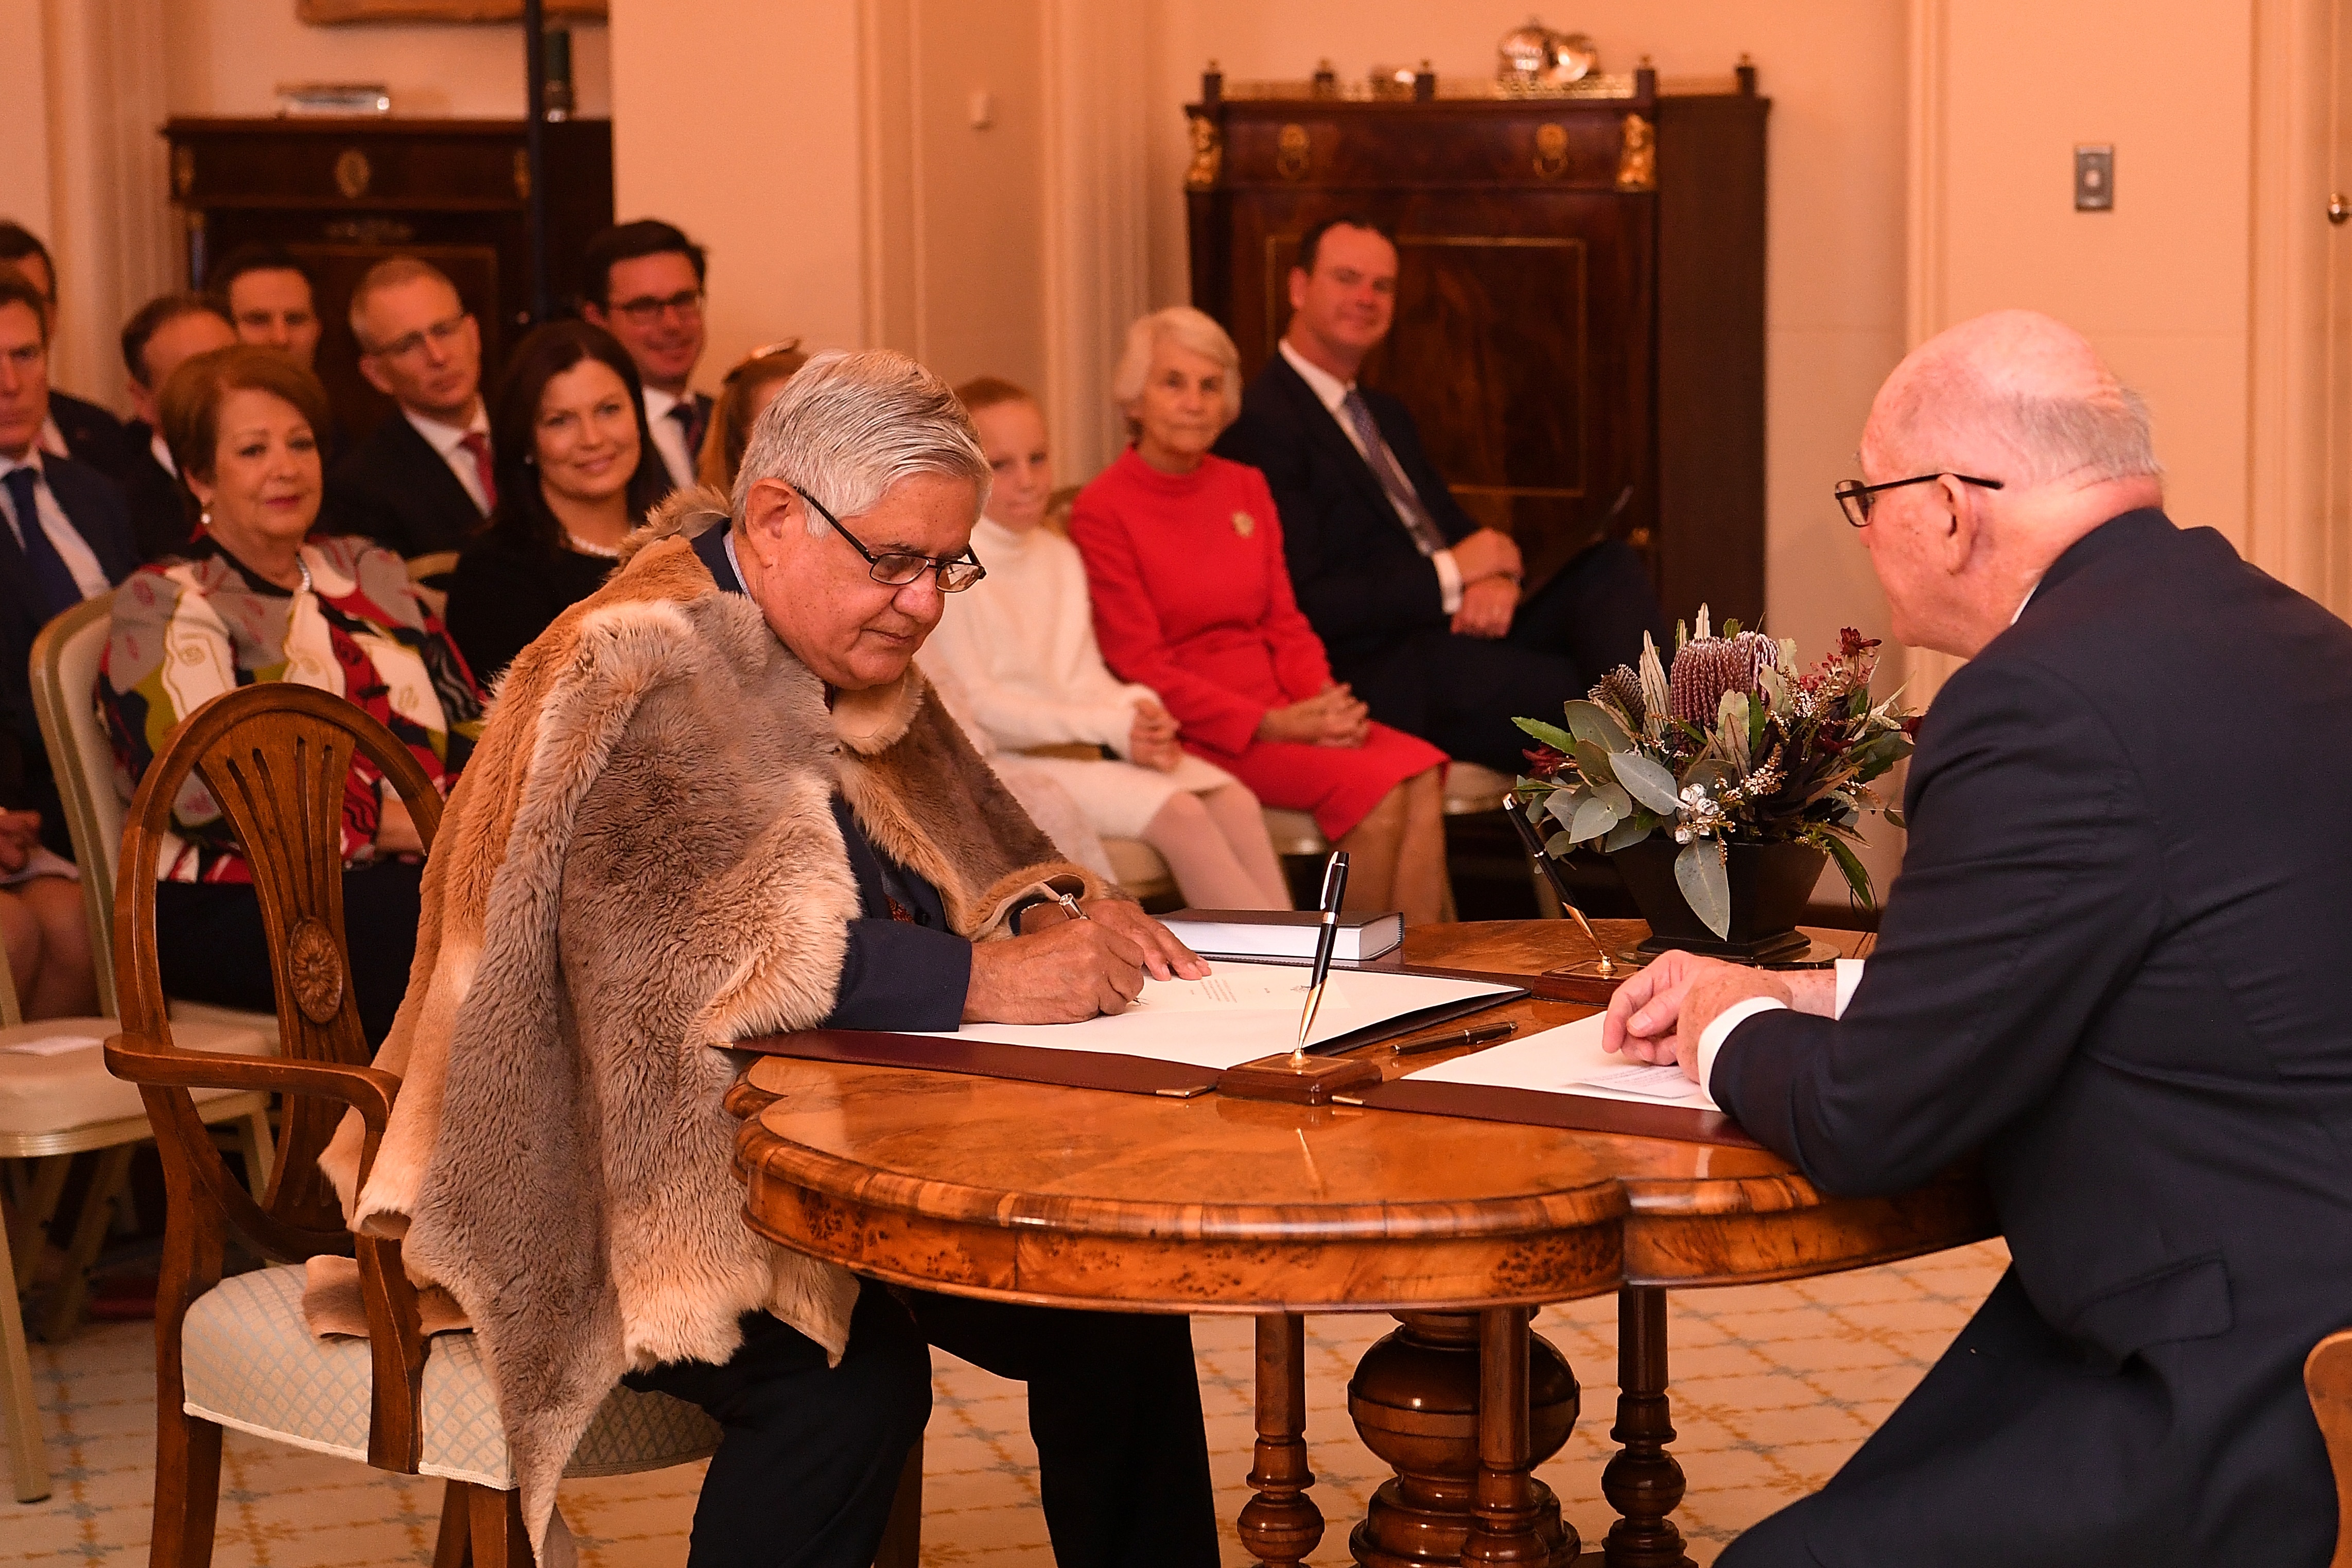 Member for Hasluck Ken Wyatt (left) is sworn in as the as Minister for Indigenous Australians by Governor-General Sir Peter Cosgrove